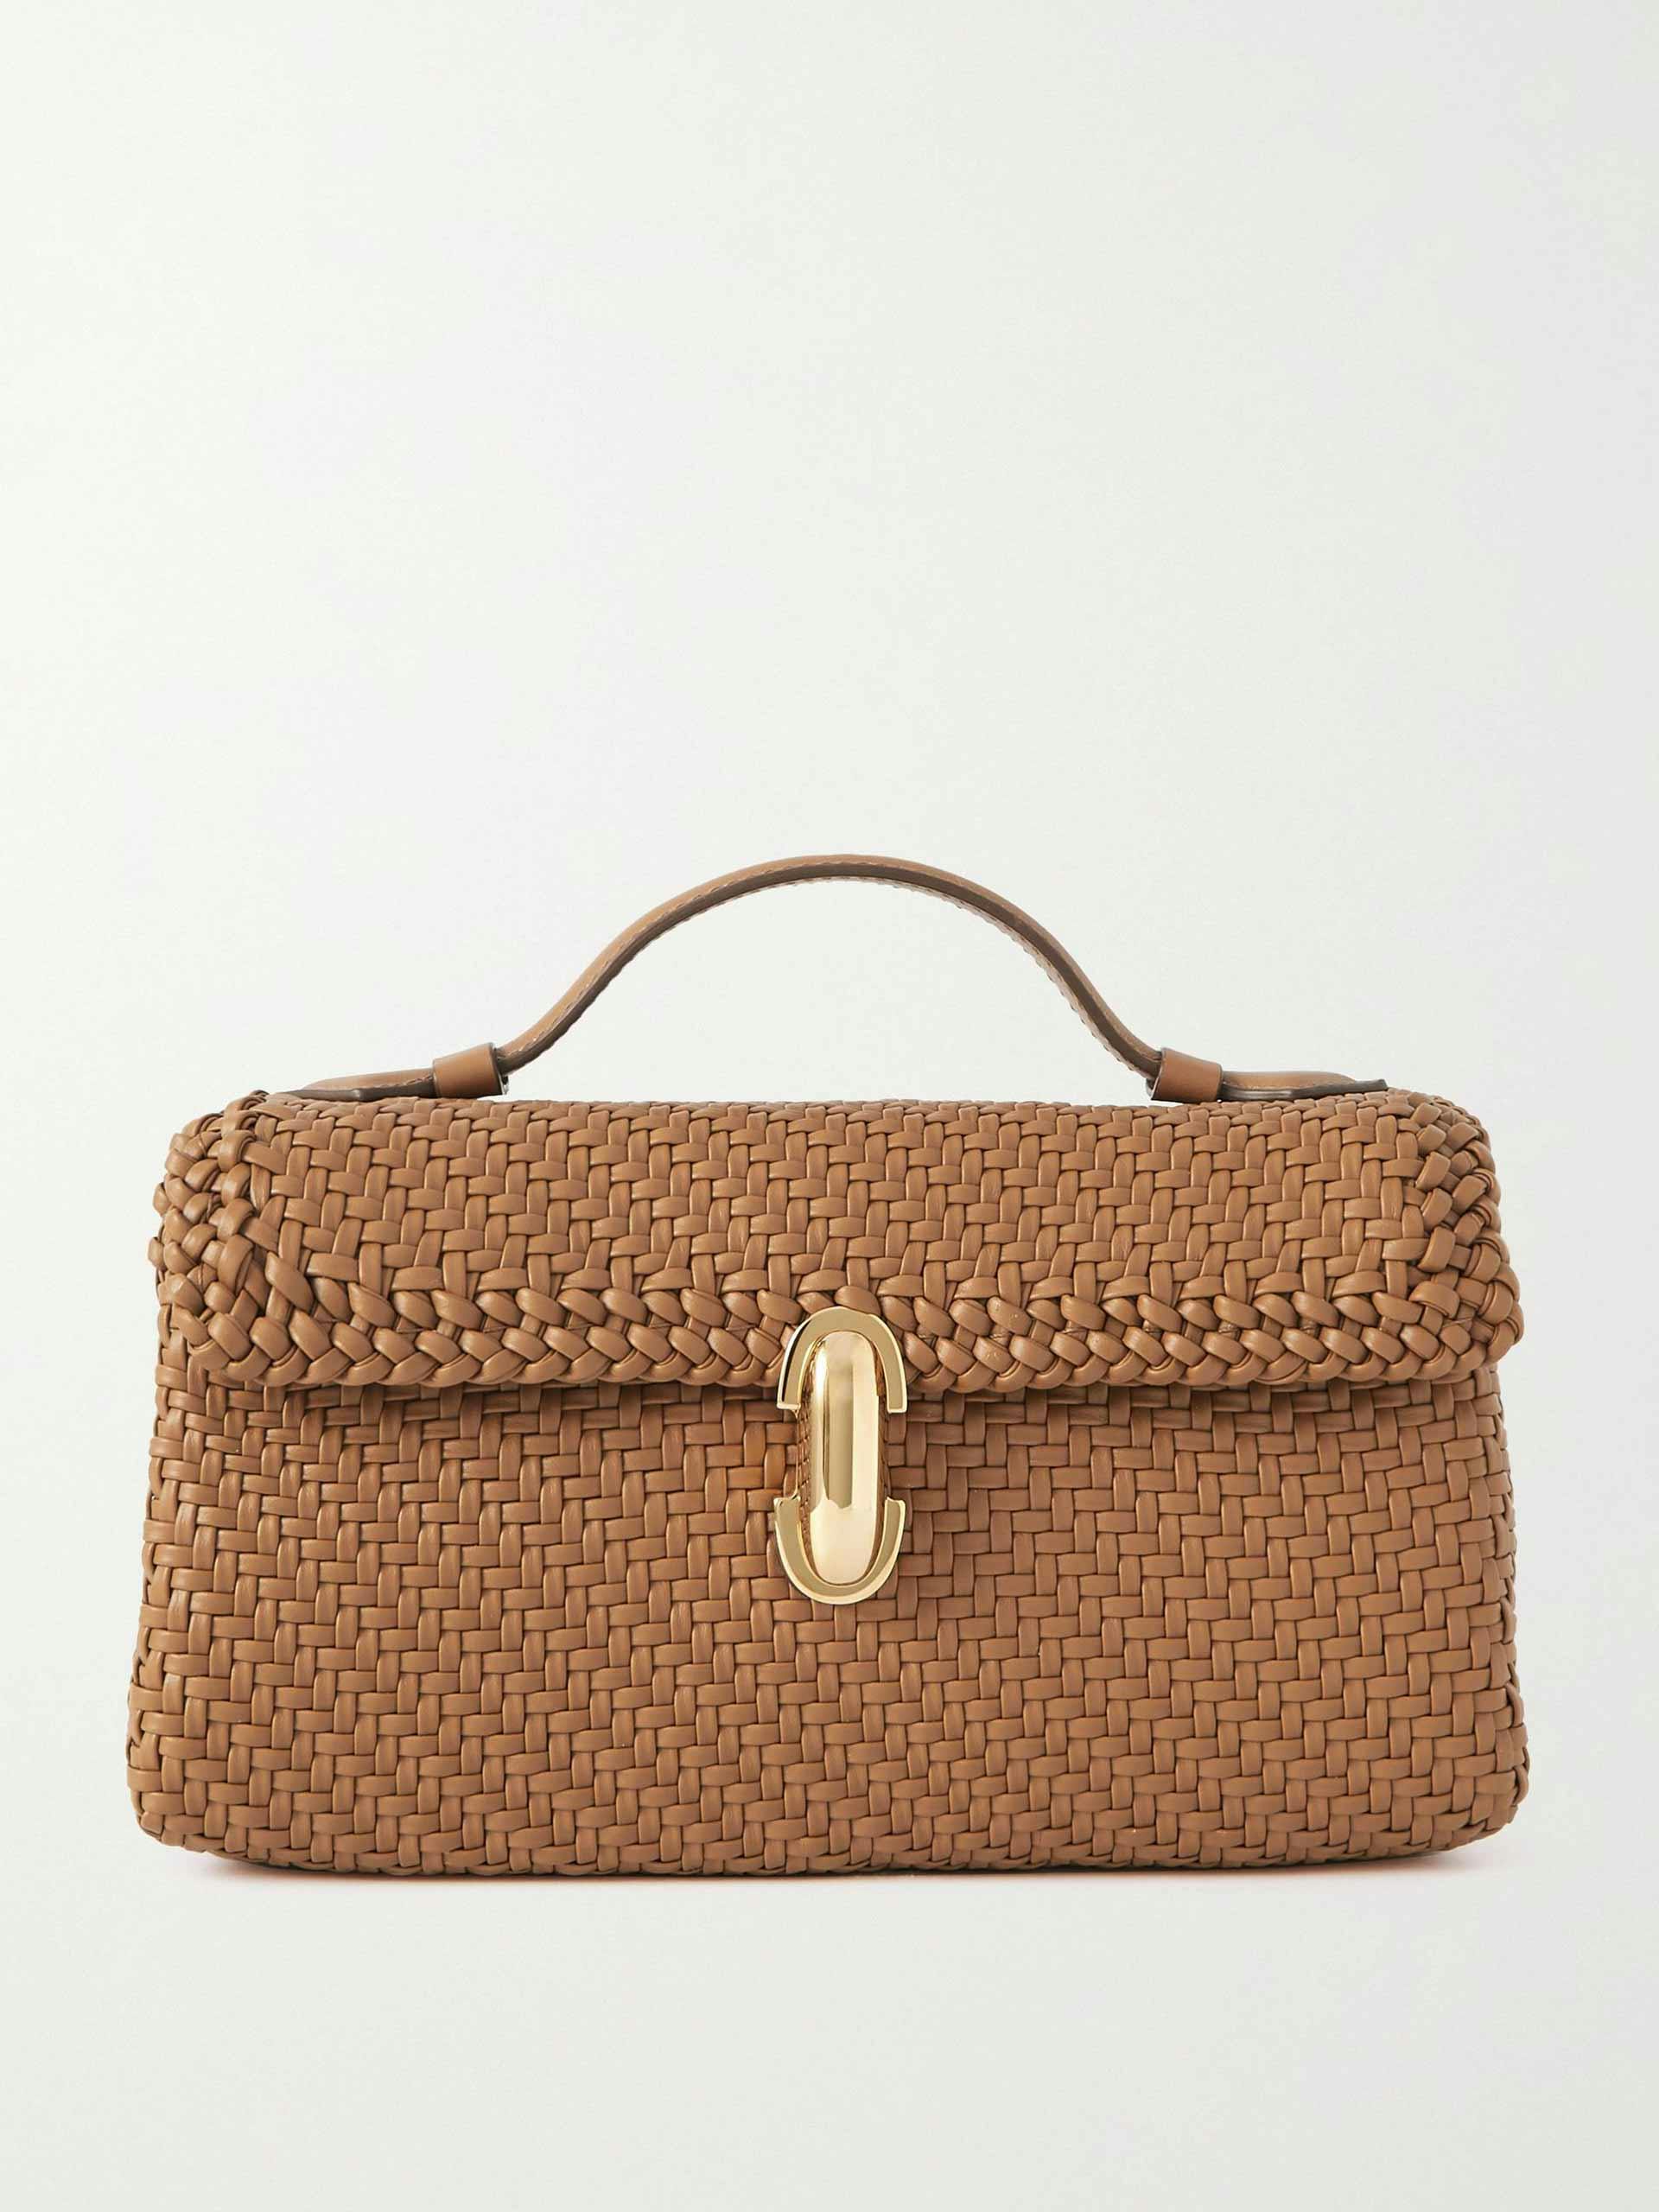 Woven leather top handle bag